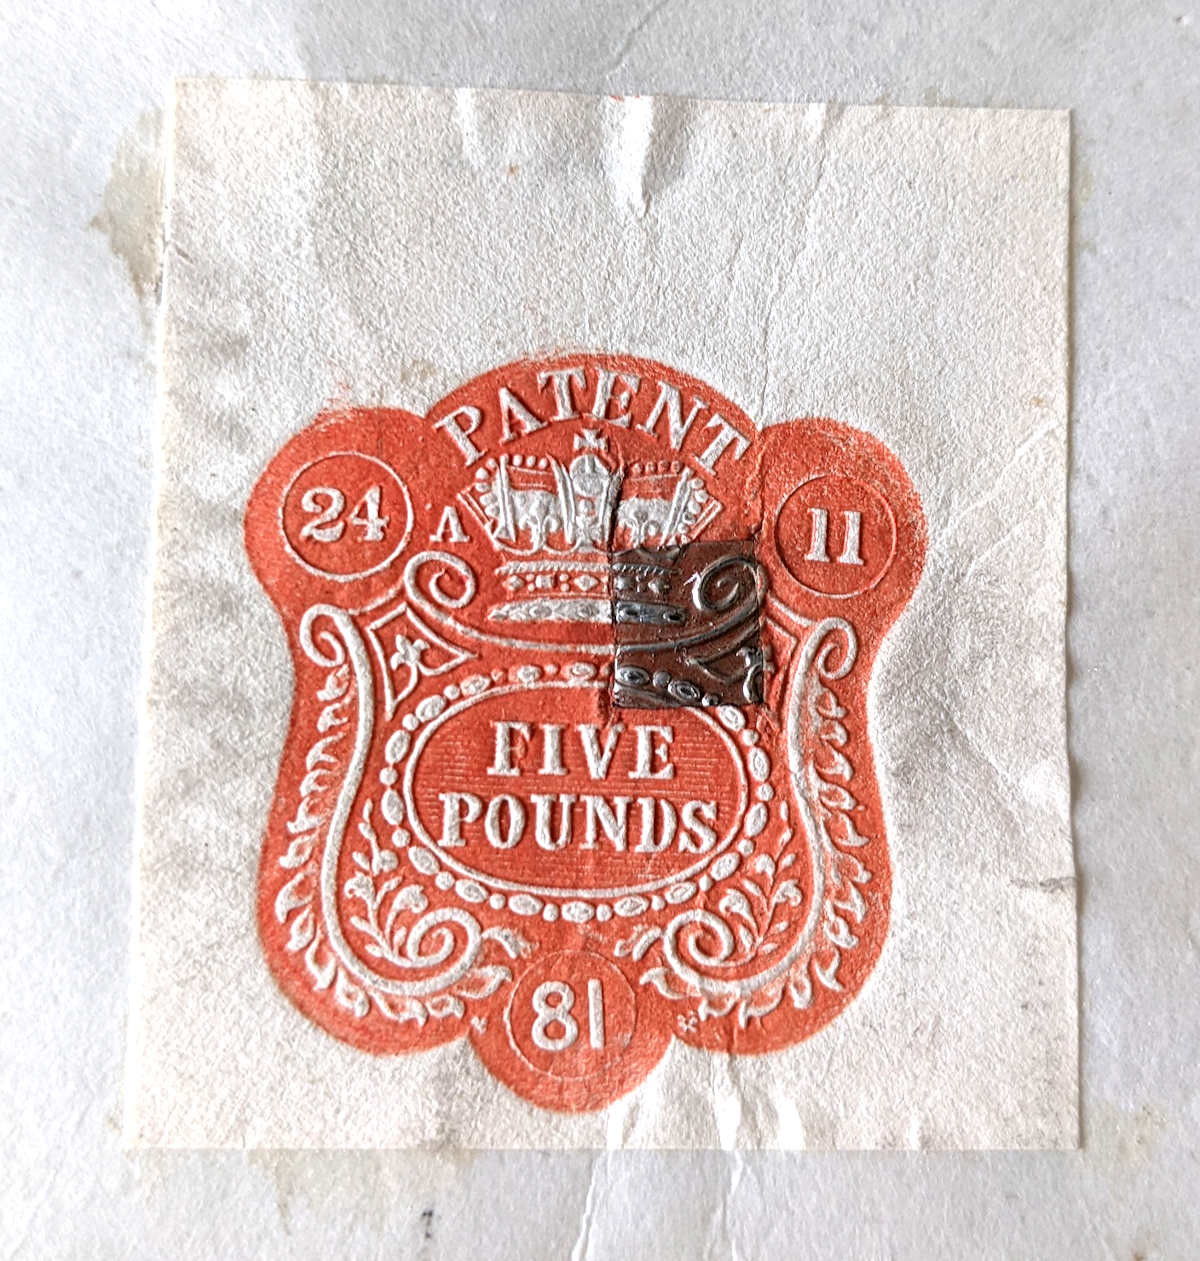 Five pound stamp on letters patent 1881